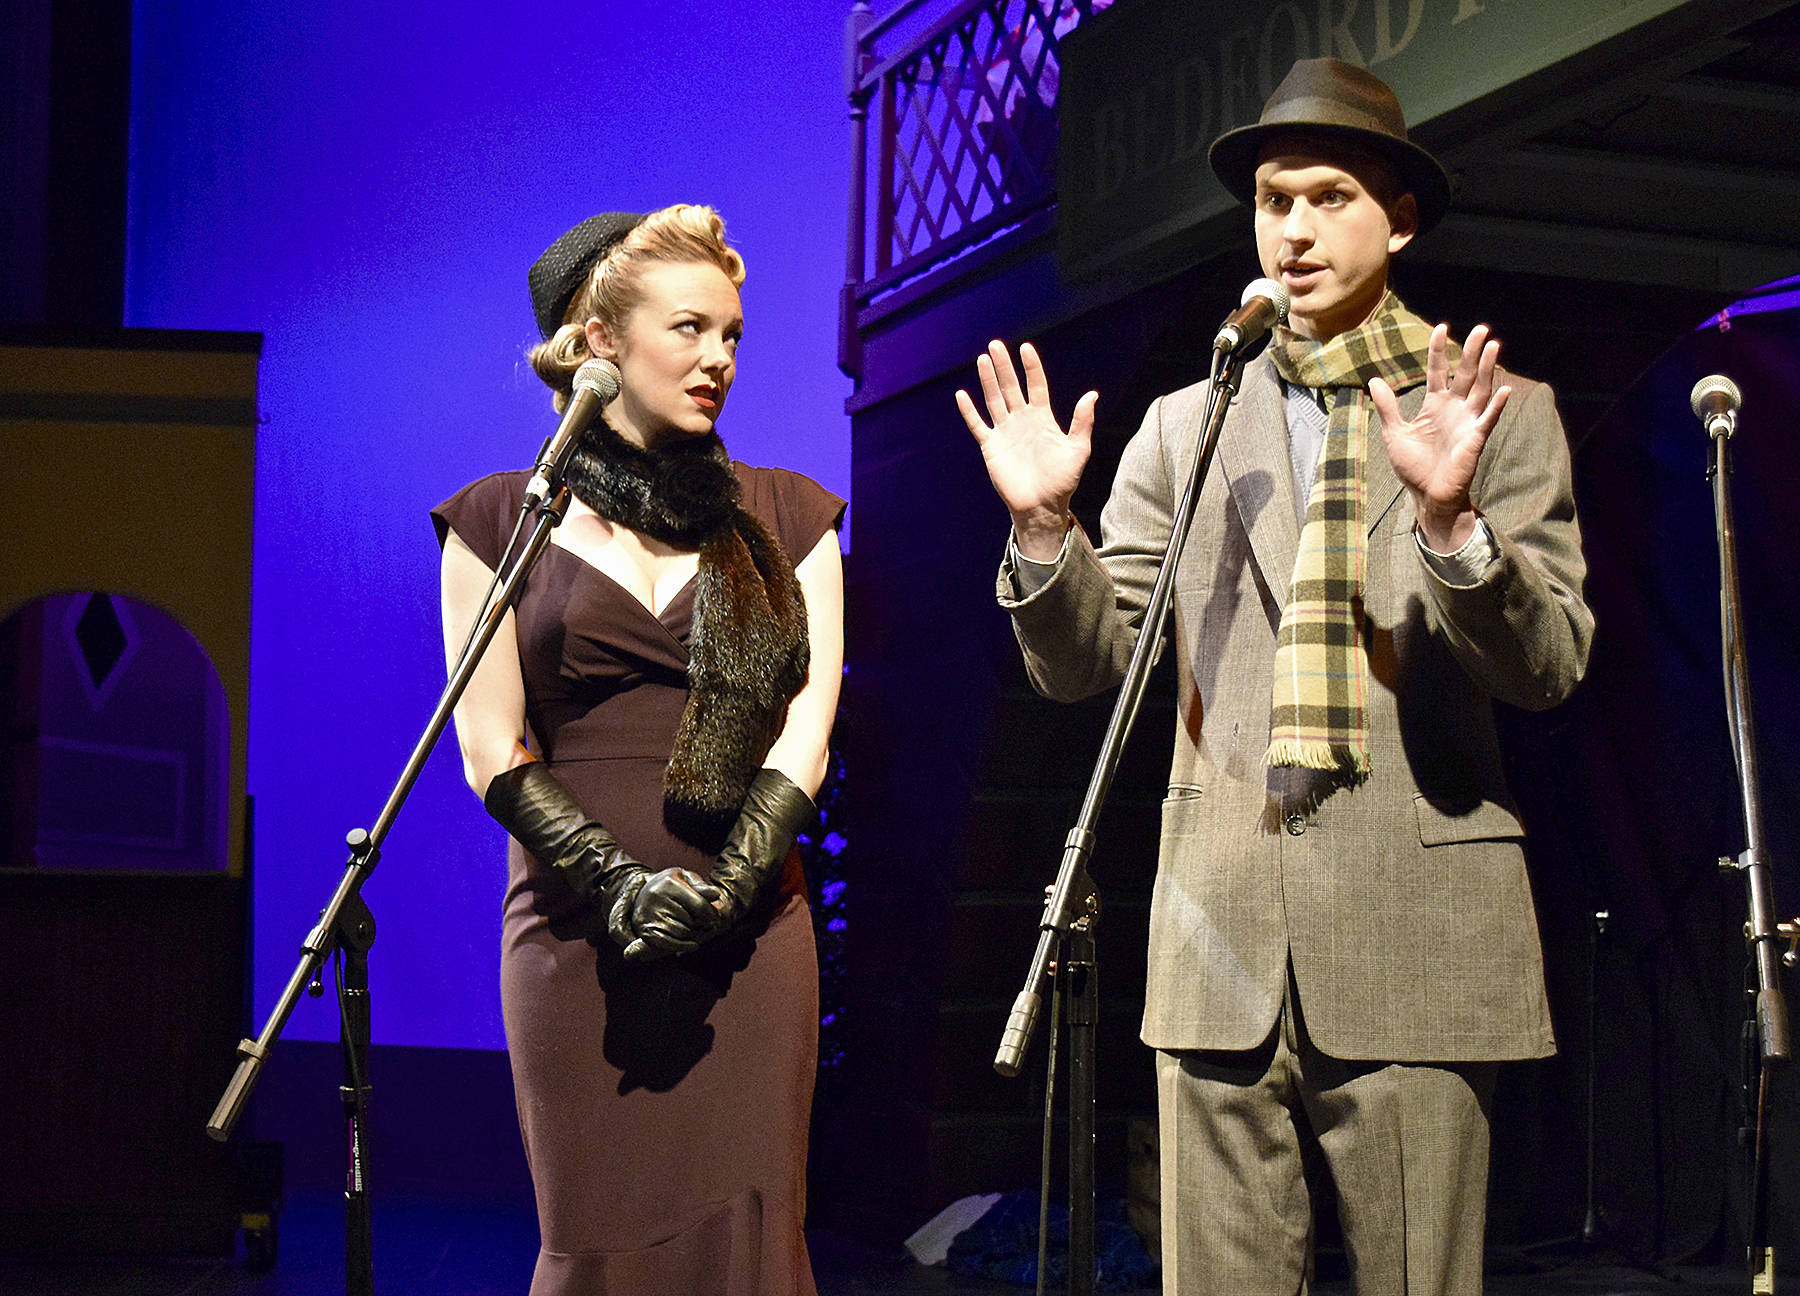 Olena Hodges plays the character, Violet, and Gabe Harshman is George Bailey in the WICA play, “It’s a Wonderful Life.” Photo by Patricia Guthrie